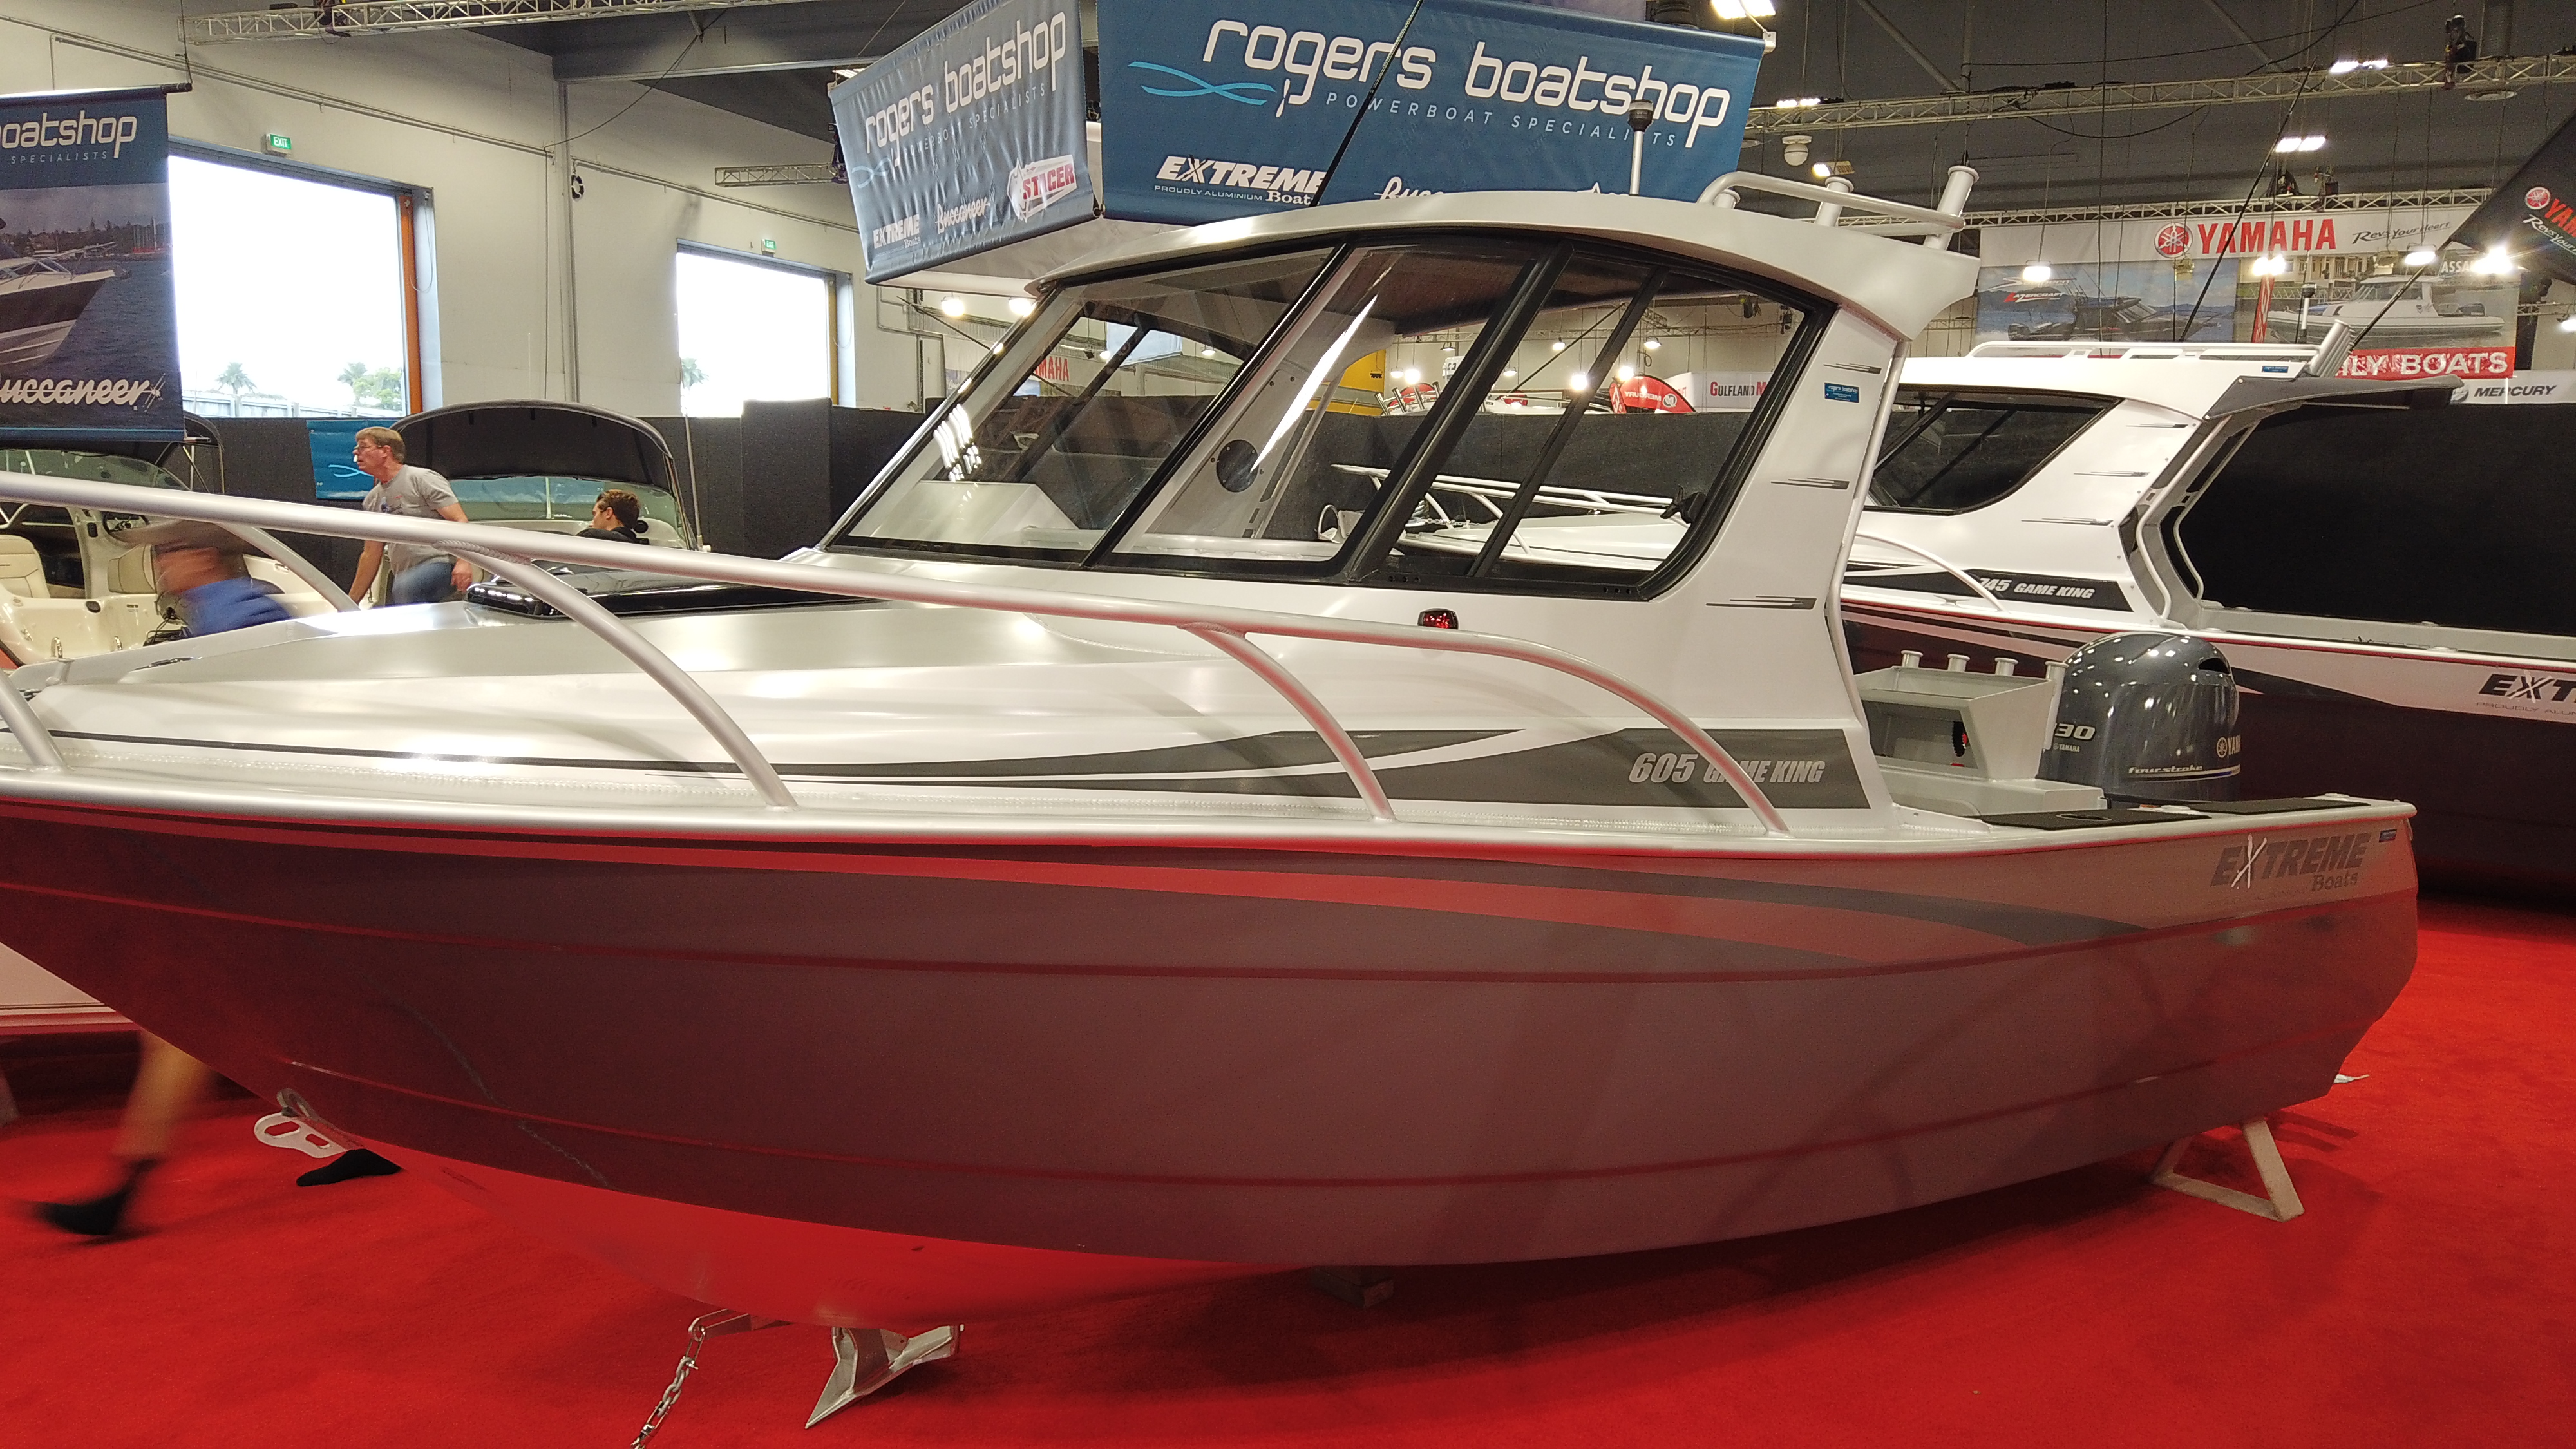 Rogers Boatshop: Extreme /  605 GAME KING PACKAGE / 2021